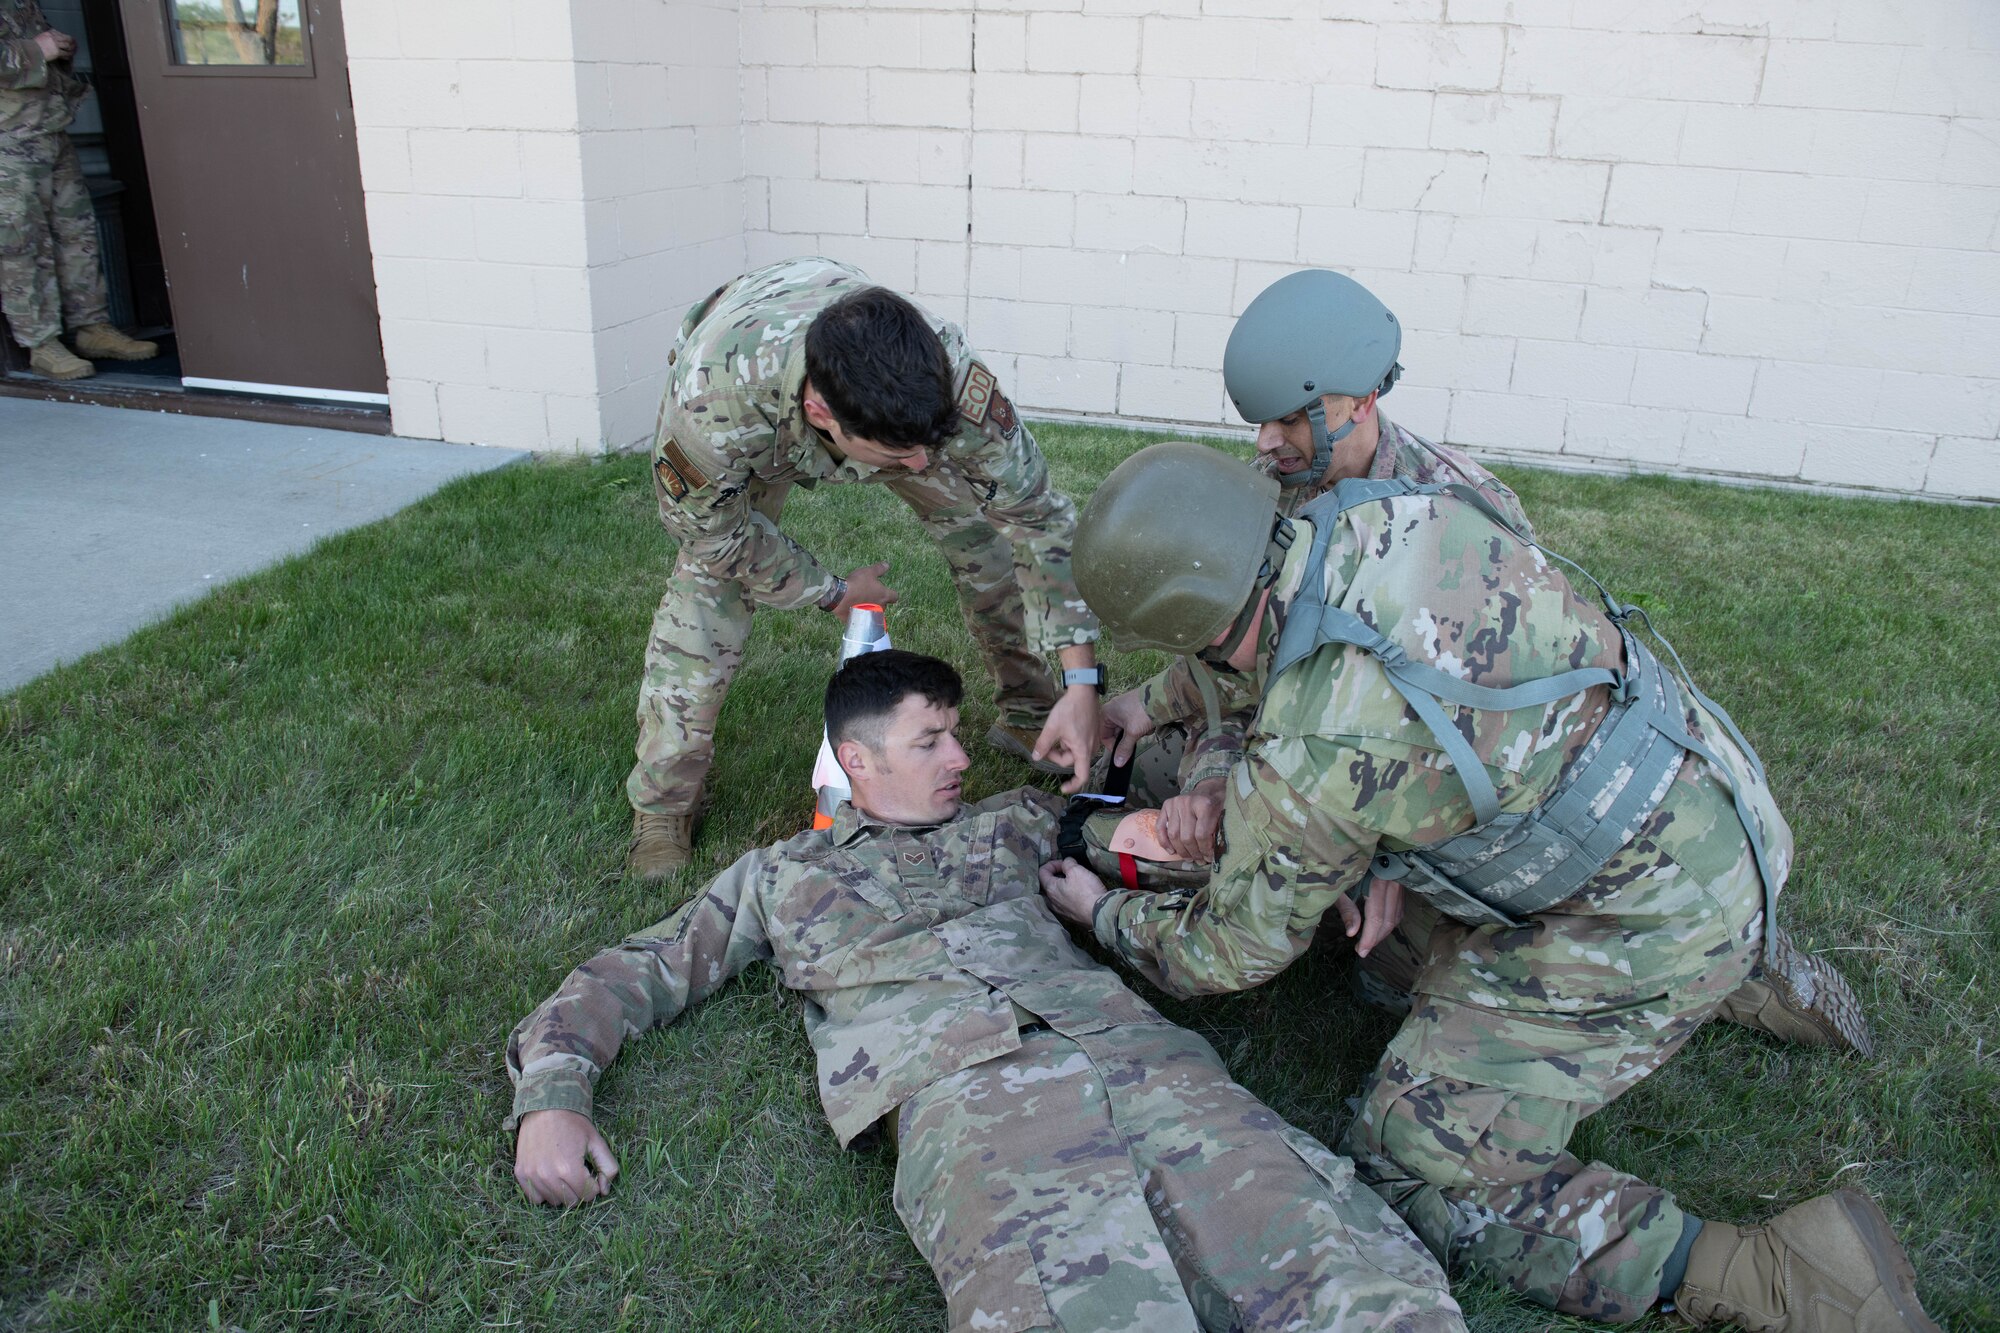 Airmen treat a simulated injury